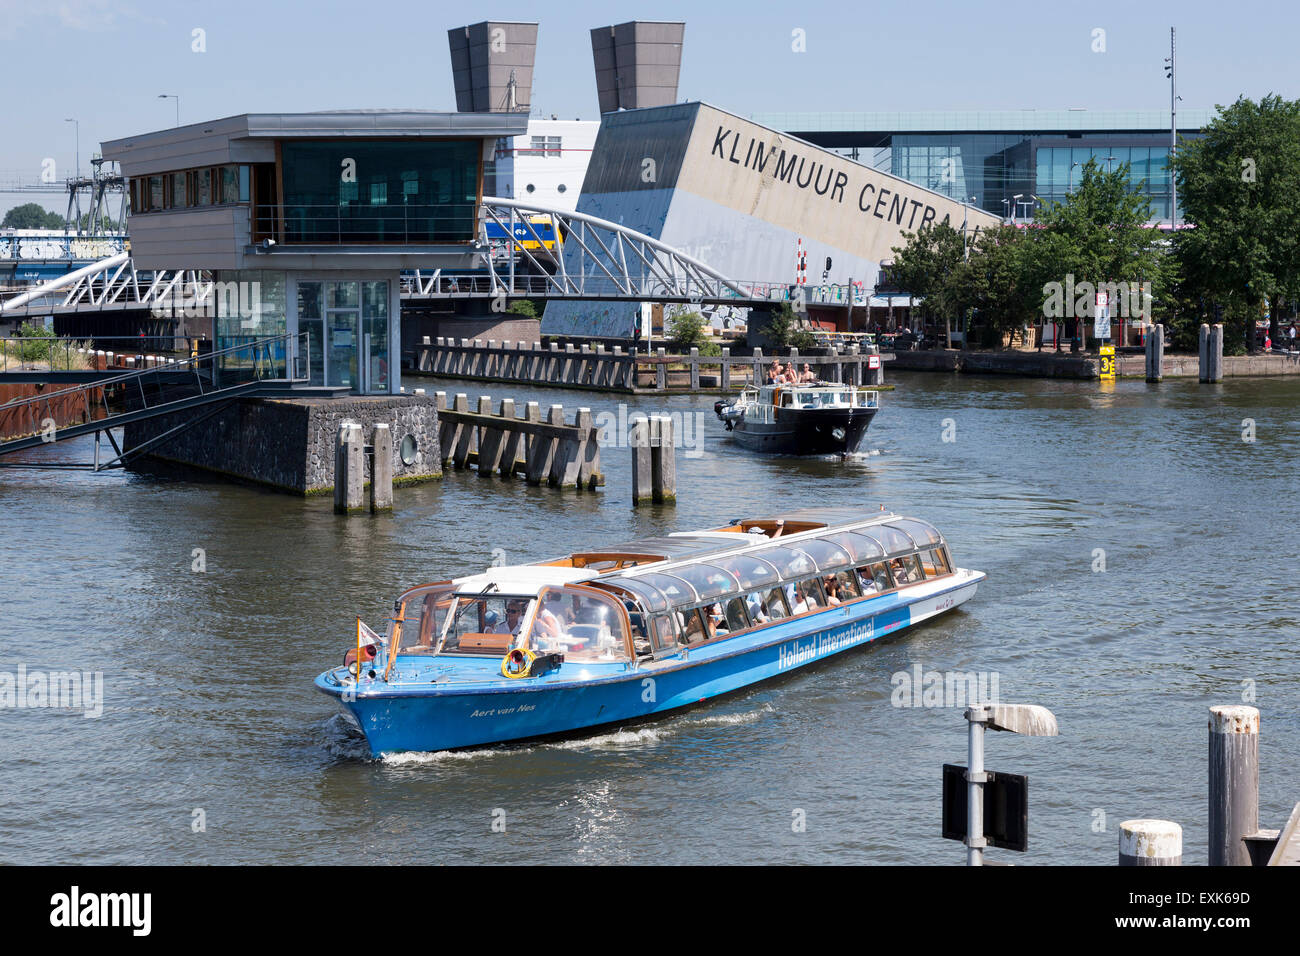 Tourist canal boat in Amsterdam, Klimmuur Centraal at the back, North Holland, The Netherlands Stock Photo